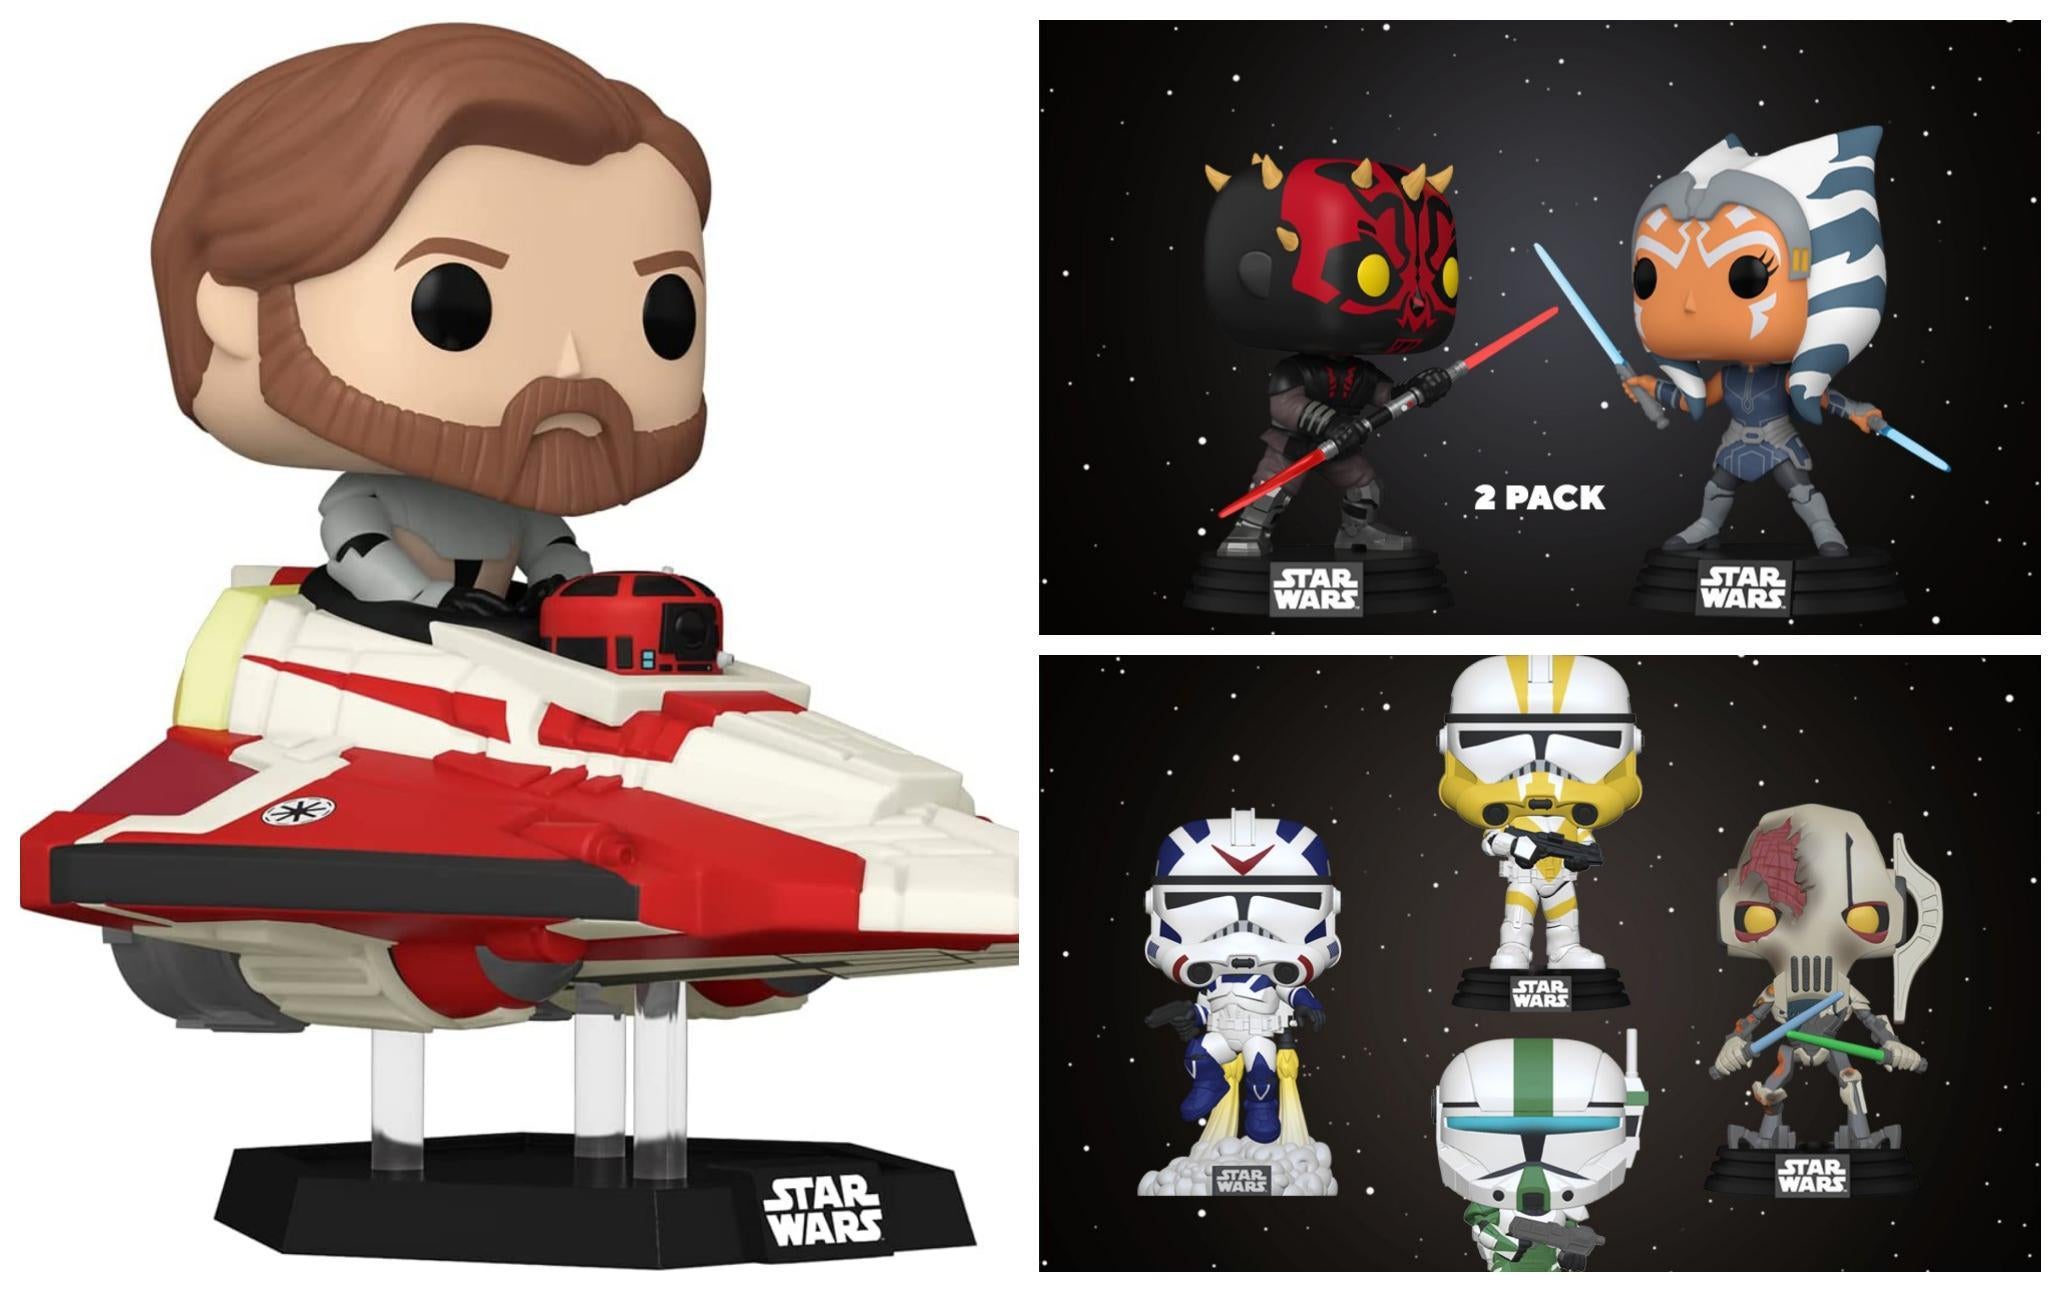 Star Wars Day 2023: Here's Where to Get The Funko Pops and